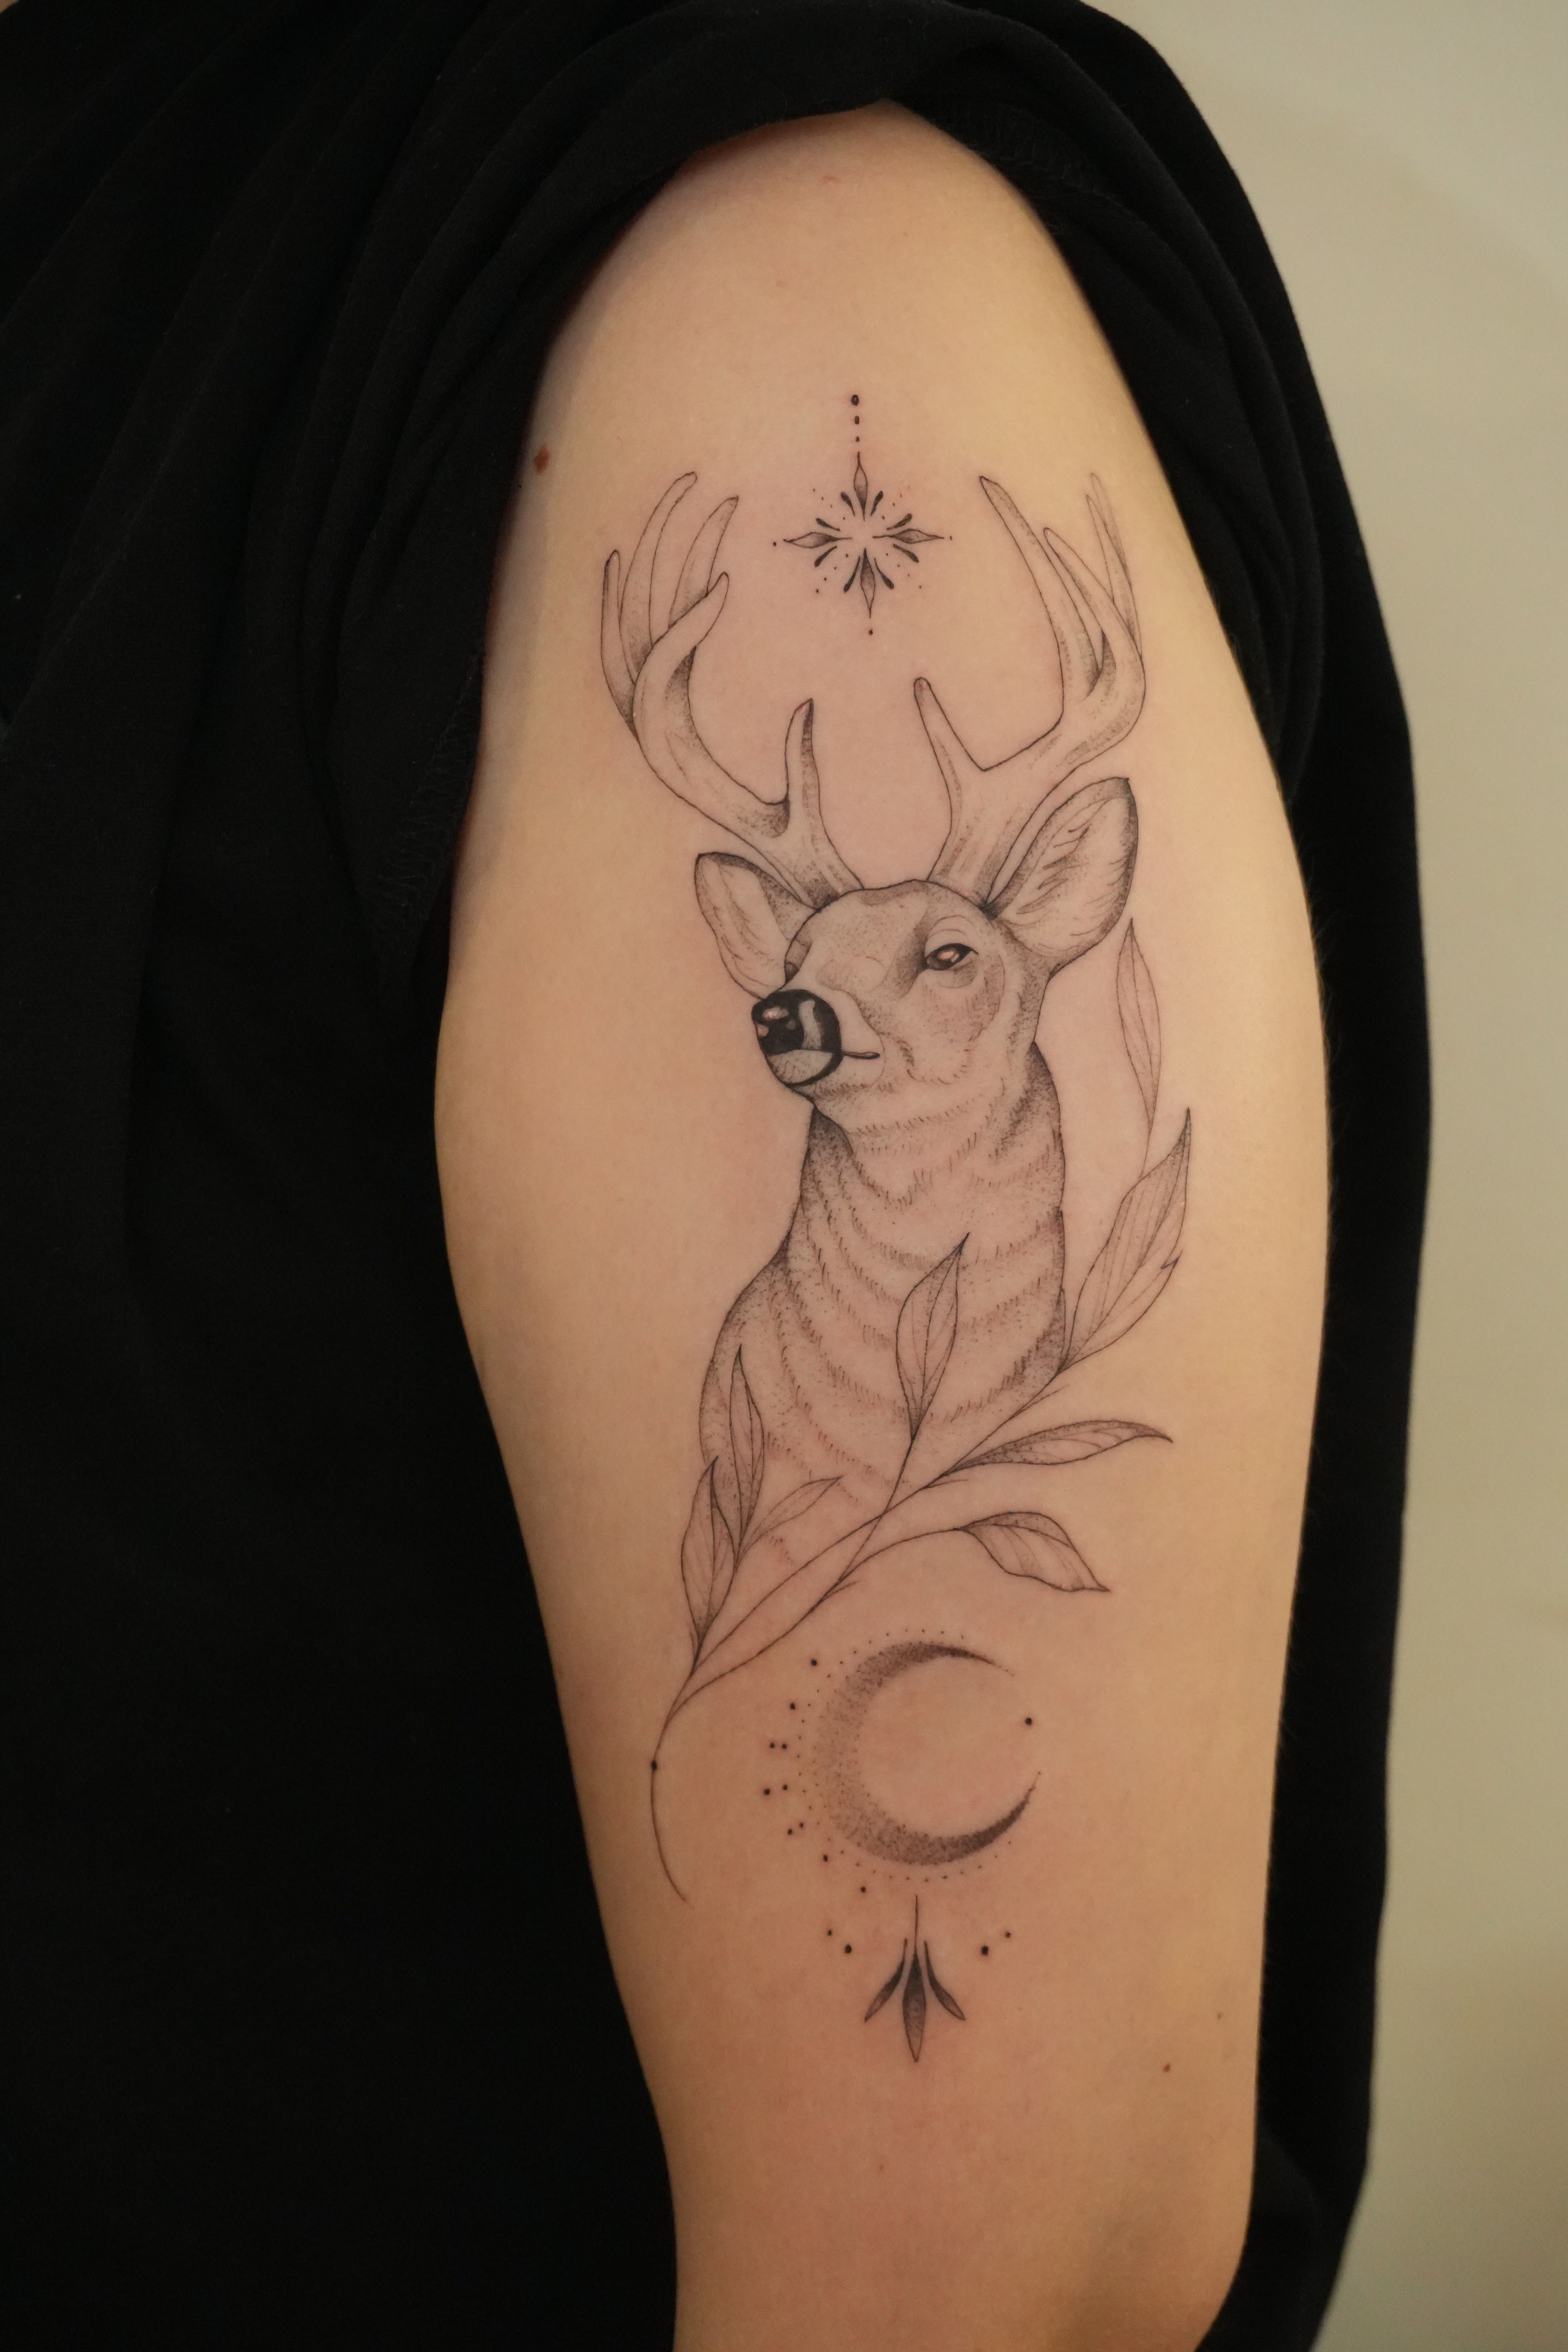 Deer Tattoo Time Lapse #shorts #tattoo #ink #timelapse #deer - YouTube